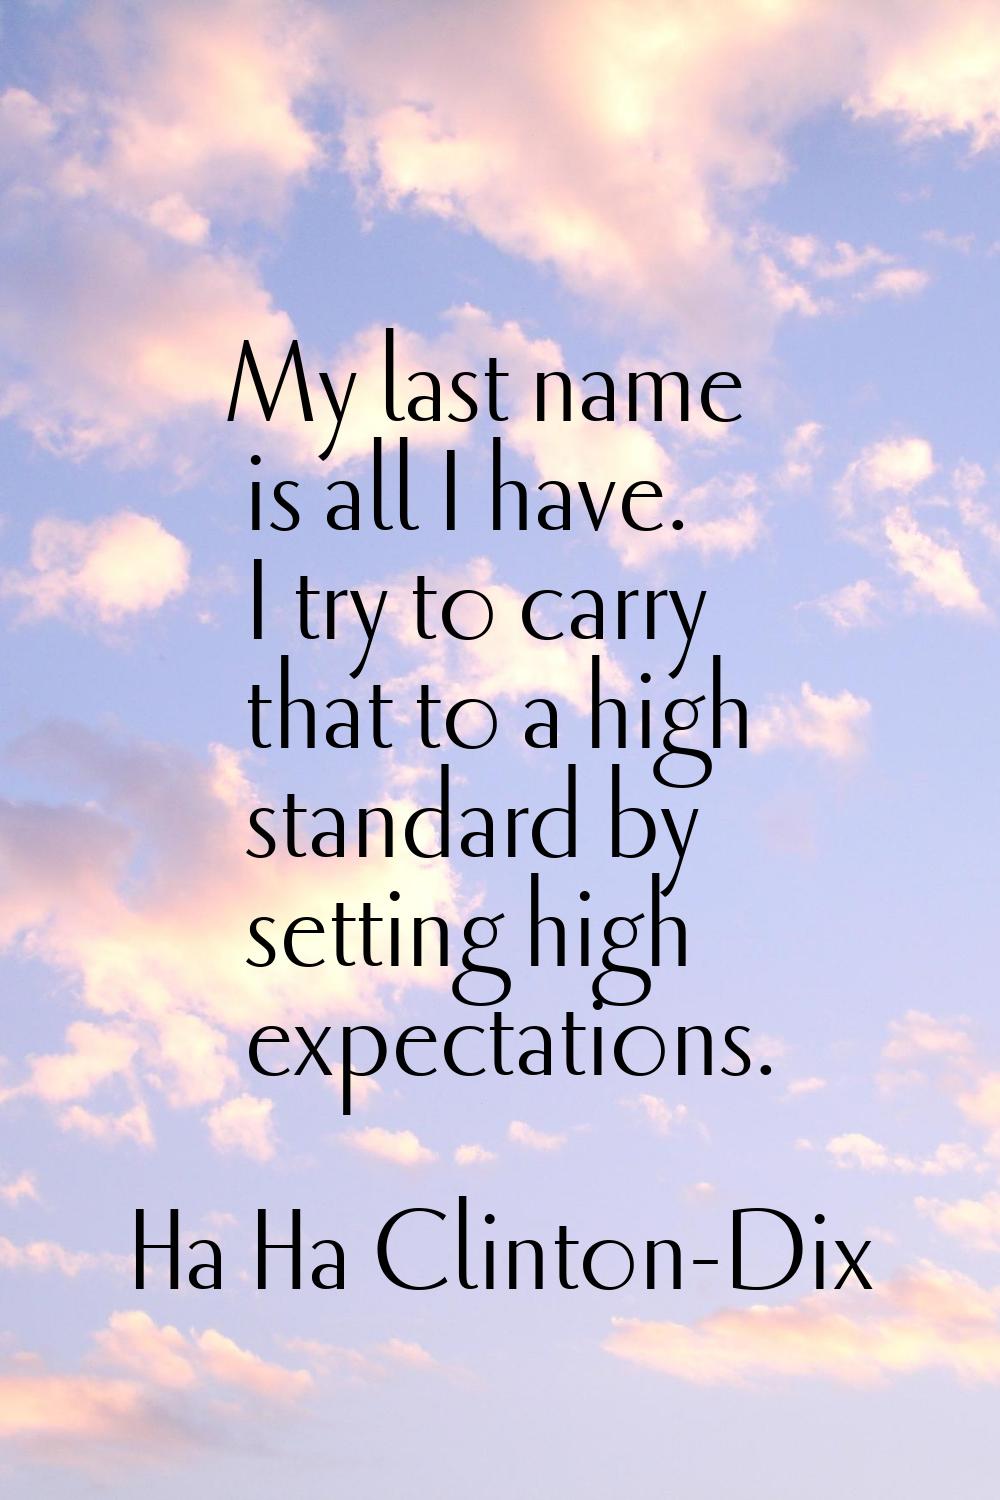 My last name is all I have. I try to carry that to a high standard by setting high expectations.